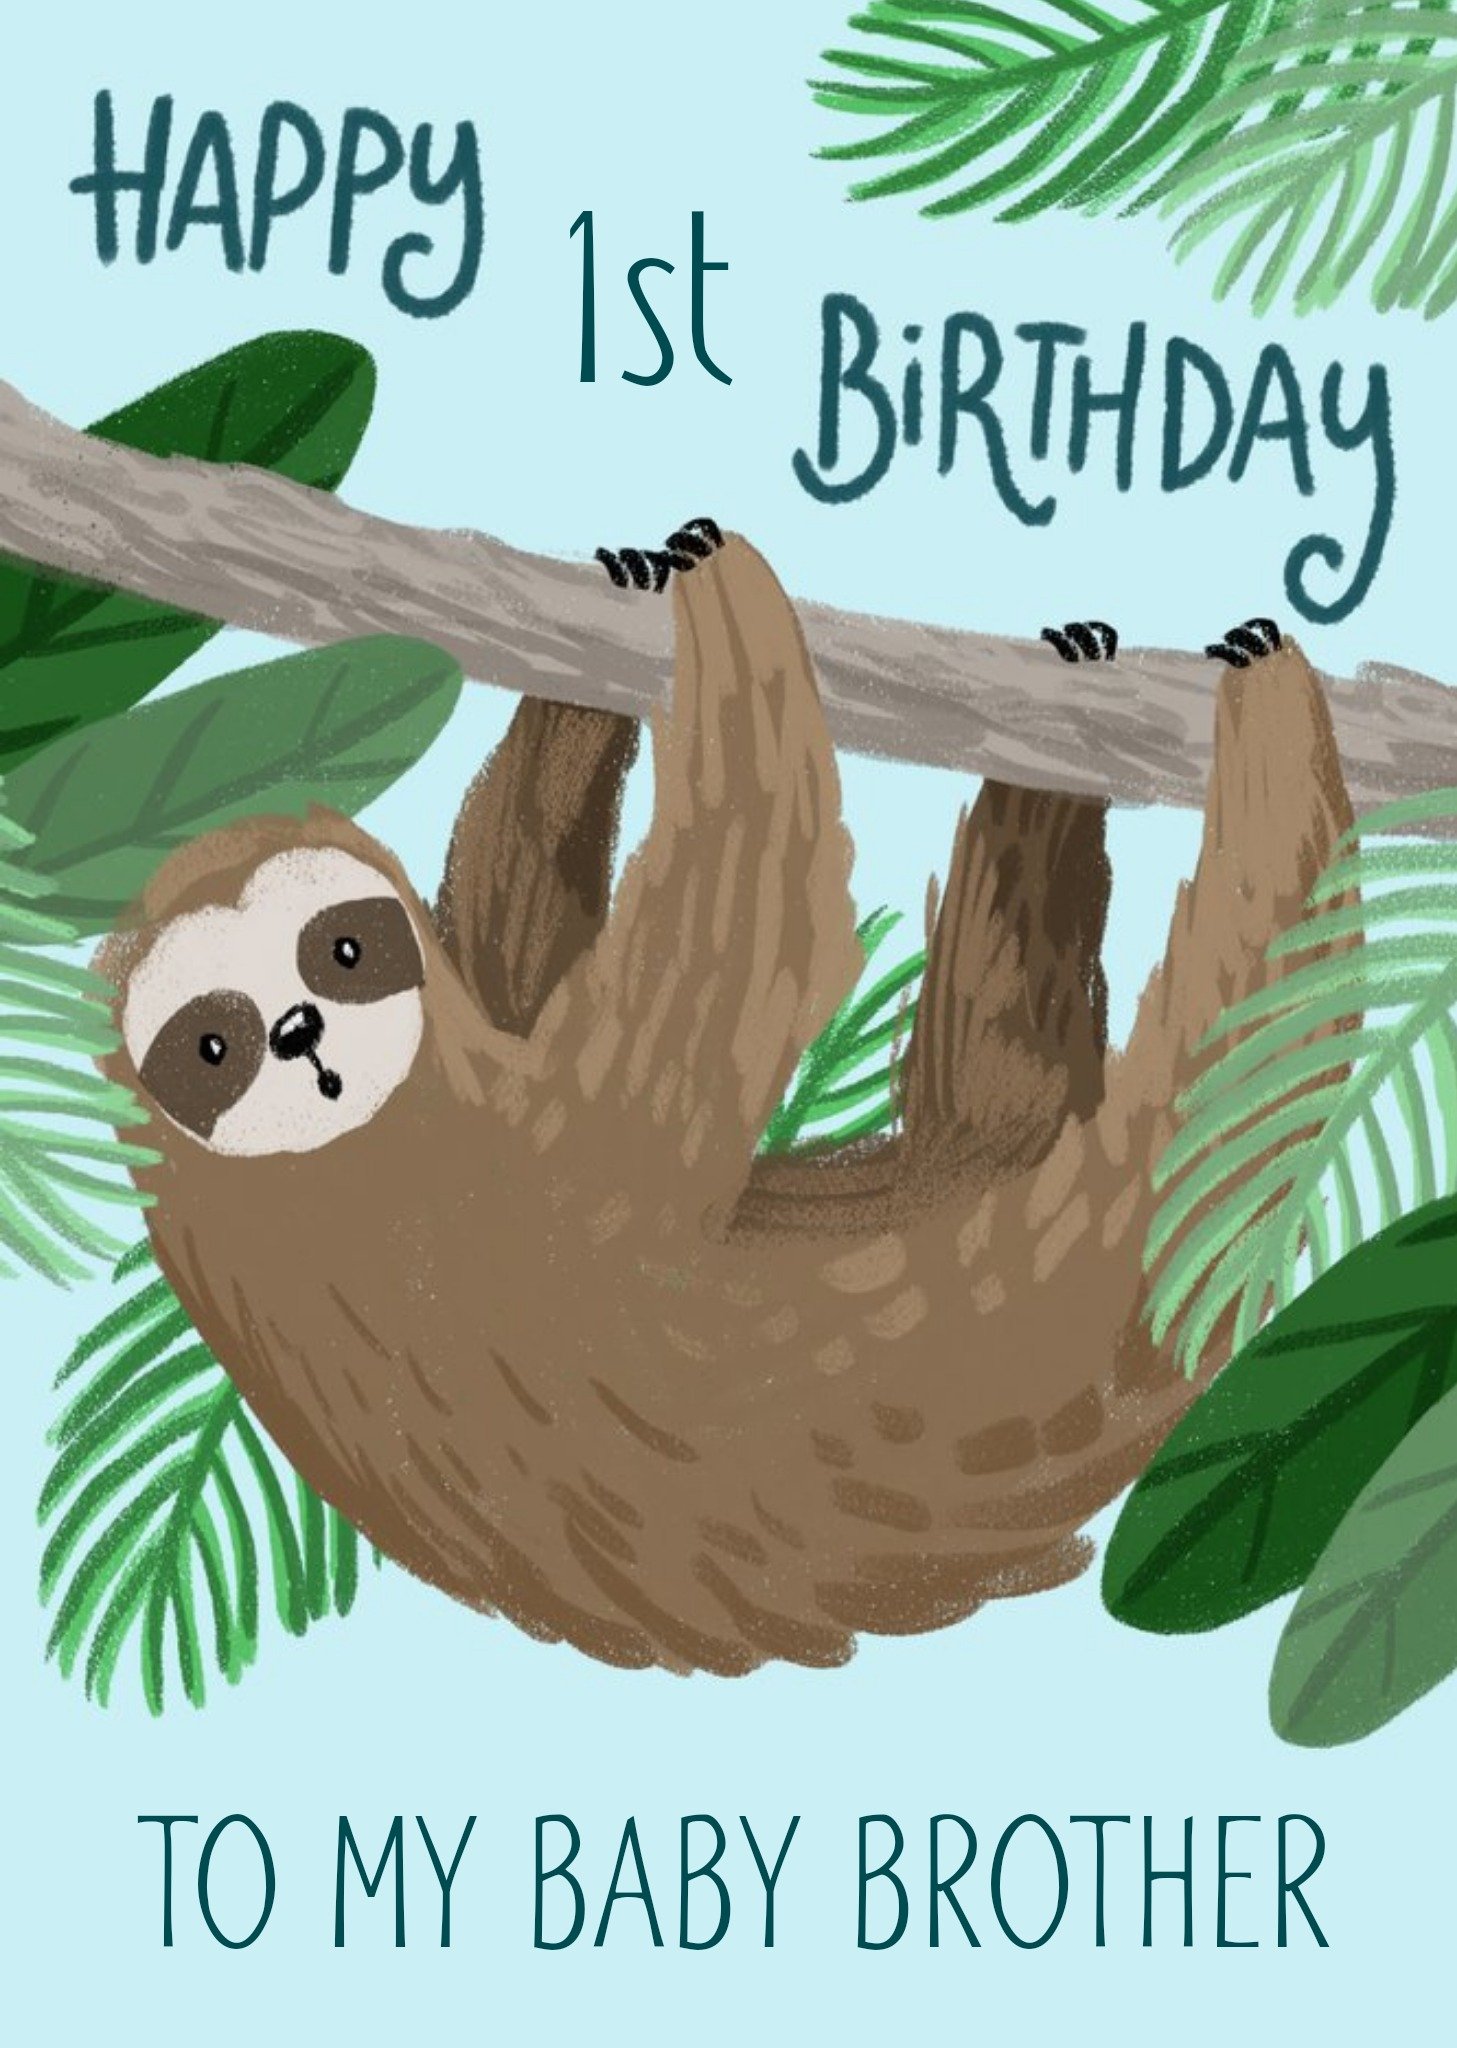 Moonpig Cute Illustrated Sloth 1st Birthday Card For Your Baby Brother By Okey Dokey Design, Large